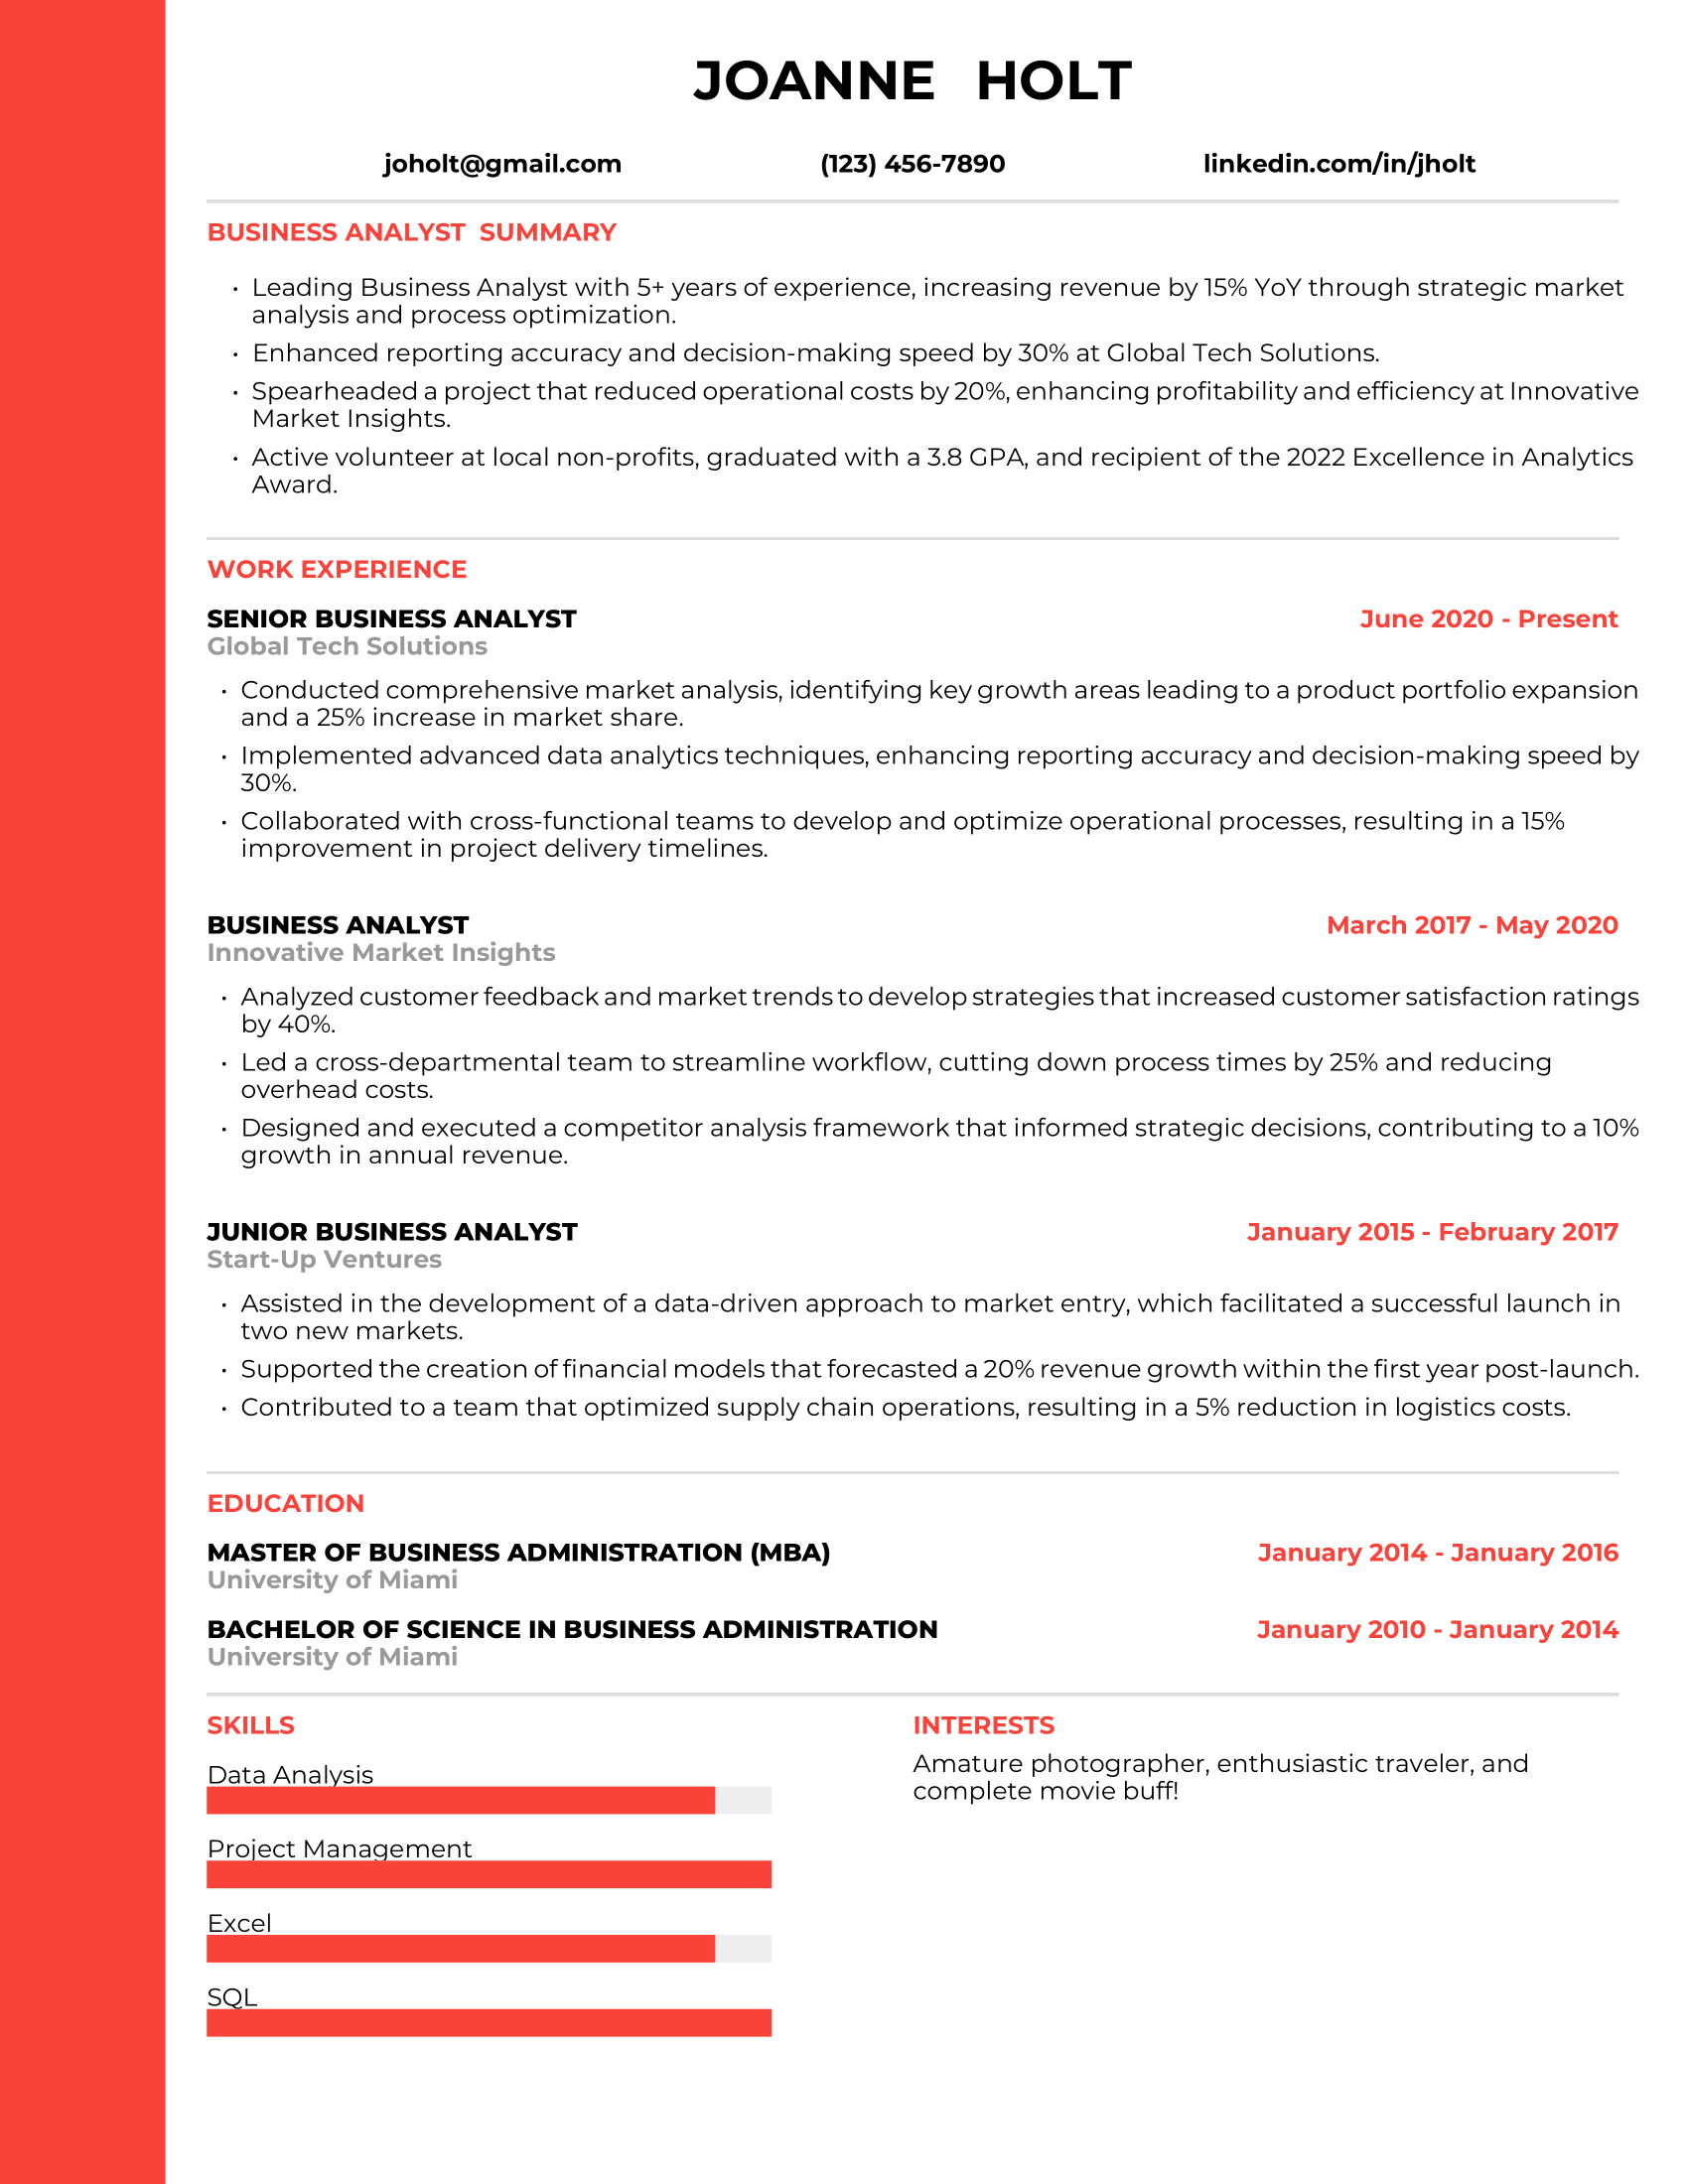 Business Analyst Resume Example #1 - Traditional